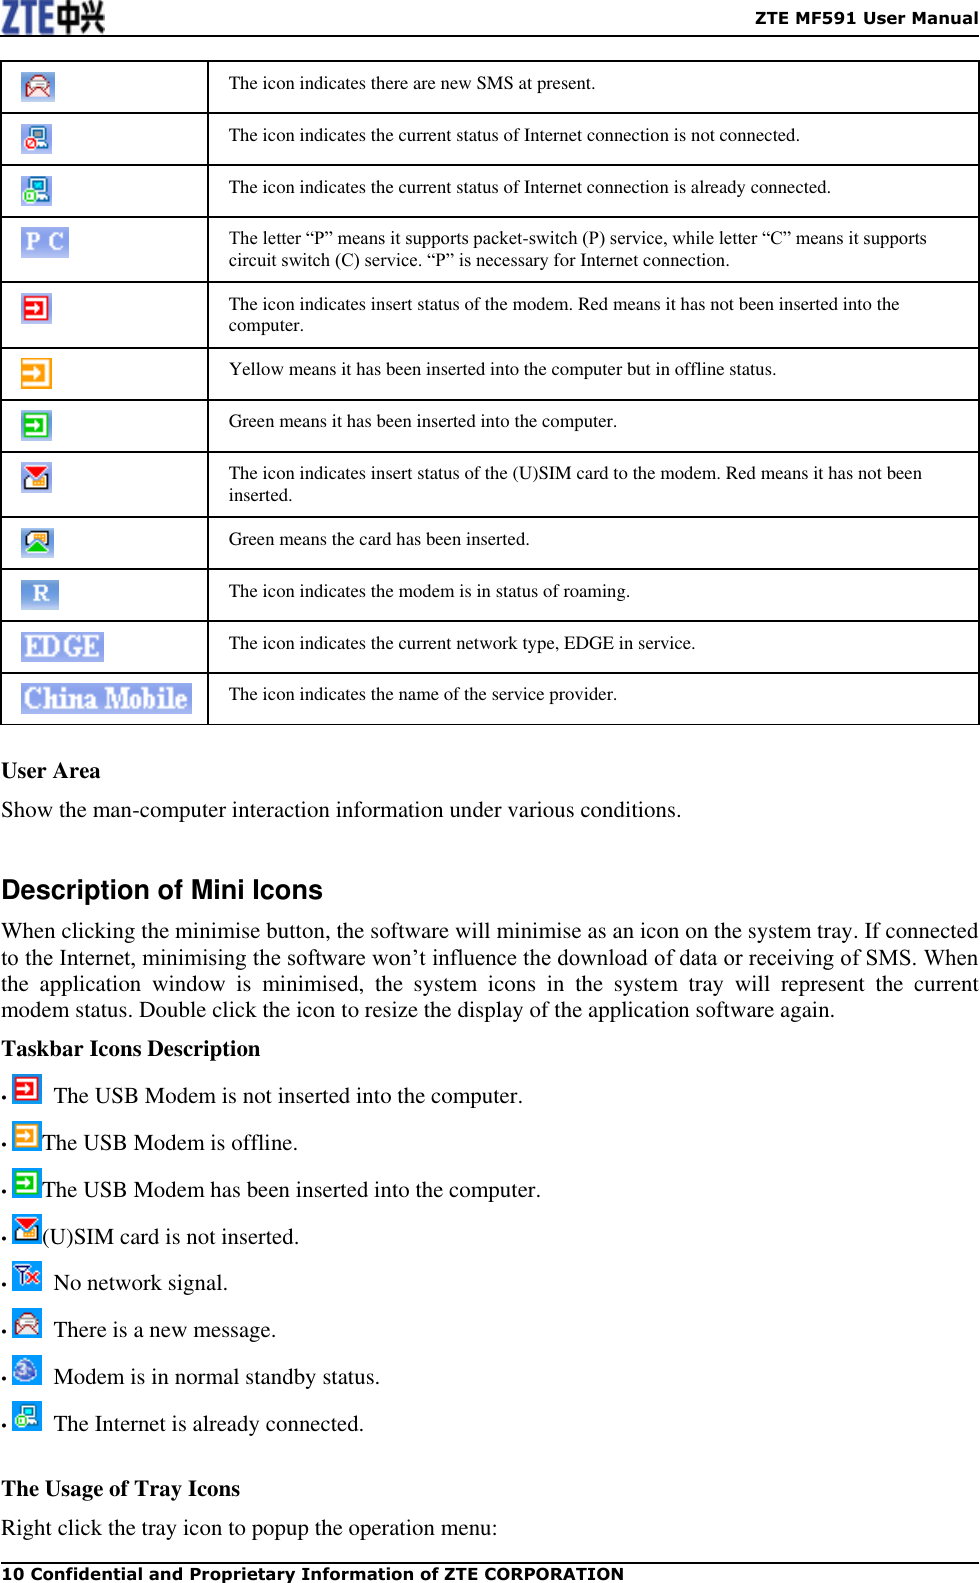    ZTE MF591 User Manual 10 Confidential and Proprietary Information of ZTE CORPORATION  The icon indicates there are new SMS at present.  The icon indicates the current status of Internet connection is not connected.  The icon indicates the current status of Internet connection is already connected.  The letter “P” means it supports packet-switch (P) service, while letter “C” means it supports circuit switch (C) service. “P” is necessary for Internet connection.  The icon indicates insert status of the modem. Red means it has not been inserted into the computer.  Yellow means it has been inserted into the computer but in offline status.  Green means it has been inserted into the computer.  The icon indicates insert status of the (U)SIM card to the modem. Red means it has not been inserted.  Green means the card has been inserted.  The icon indicates the modem is in status of roaming.  The icon indicates the current network type, EDGE in service.  The icon indicates the name of the service provider.   User Area Show the man-computer interaction information under various conditions.  Description of Mini Icons When clicking the minimise button, the software will minimise as an icon on the system tray. If connected to the Internet, minimising the software won’t influence the download of data or receiving of SMS. When the  application  window  is  minimised,  the  system  icons  in  the  system  tray  will  represent  the  current modem status. Double click the icon to resize the display of the application software again. Taskbar Icons Description •    The USB Modem is not inserted into the computer. •  The USB Modem is offline. •  The USB Modem has been inserted into the computer. •  (U)SIM card is not inserted.   •    No network signal. •    There is a new message. •    Modem is in normal standby status. •    The Internet is already connected.  The Usage of Tray Icons Right click the tray icon to popup the operation menu: 